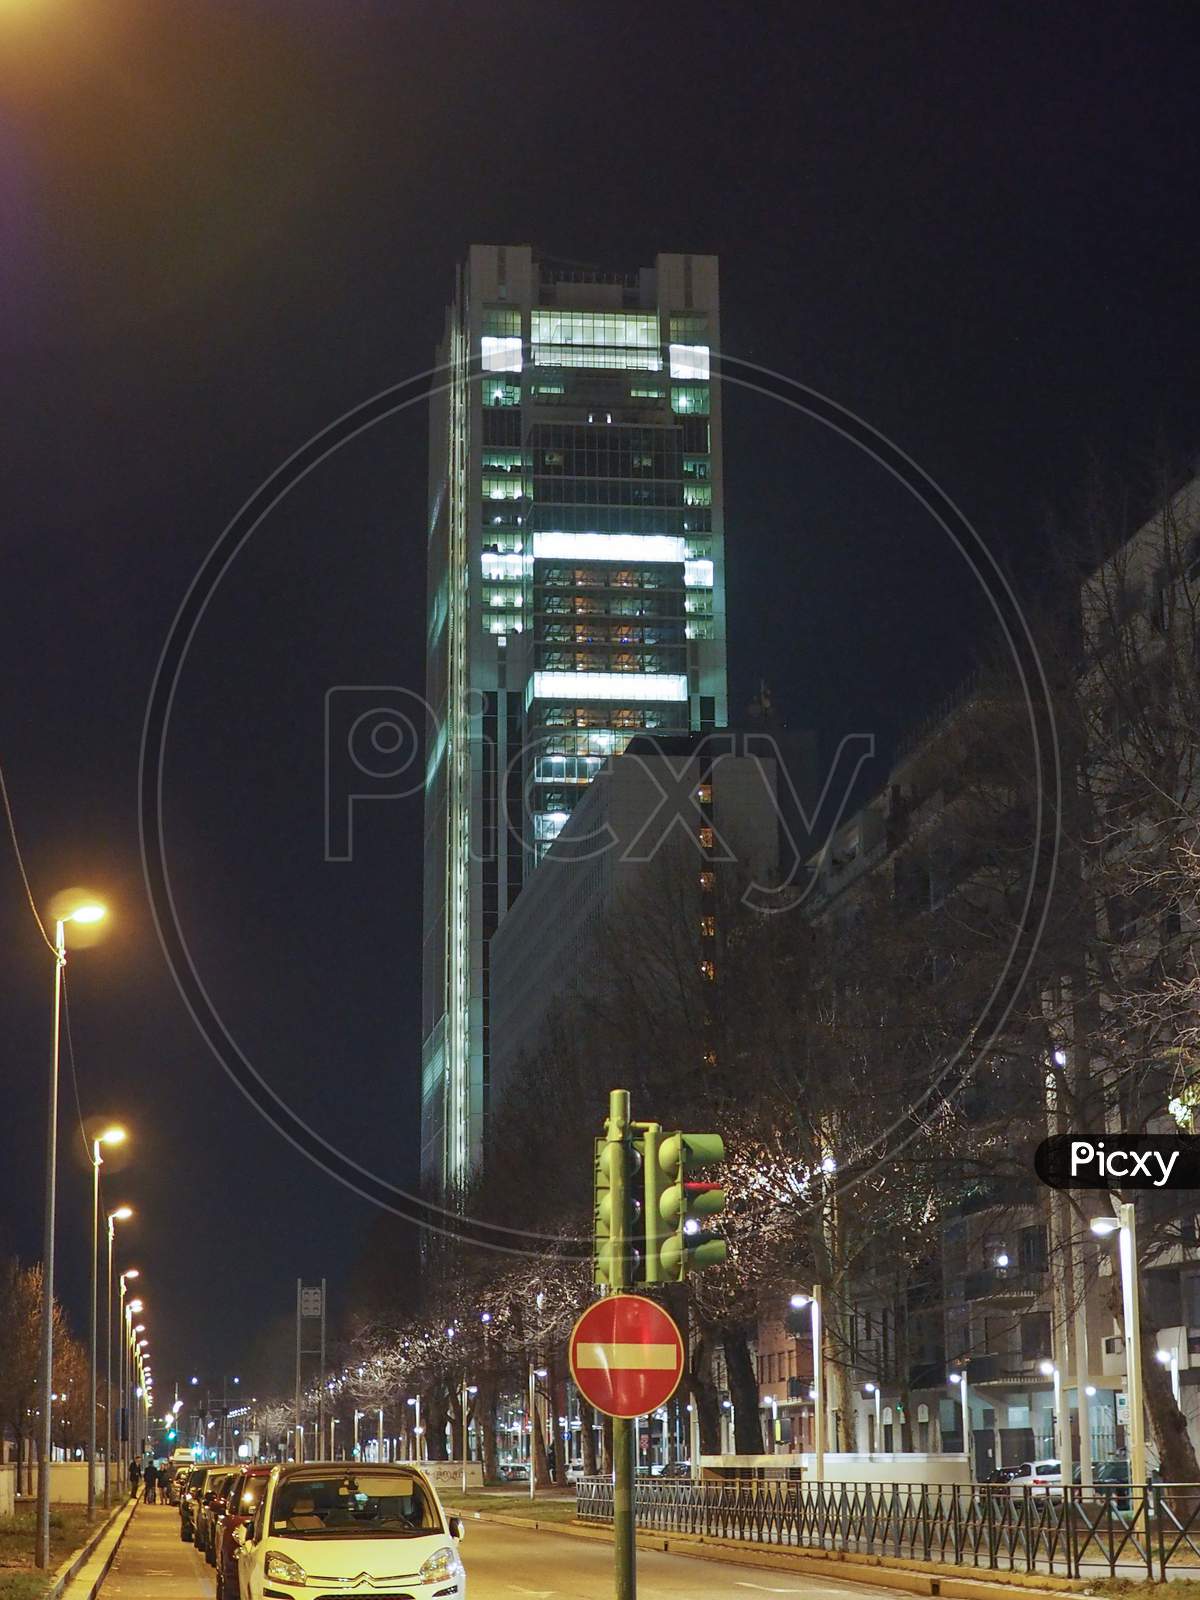 Turin, Italy - February 26, 2015: Night View Of The New San Paolo Skyscraper Designed By Renzo Piano Which Is The Highest Building In Town